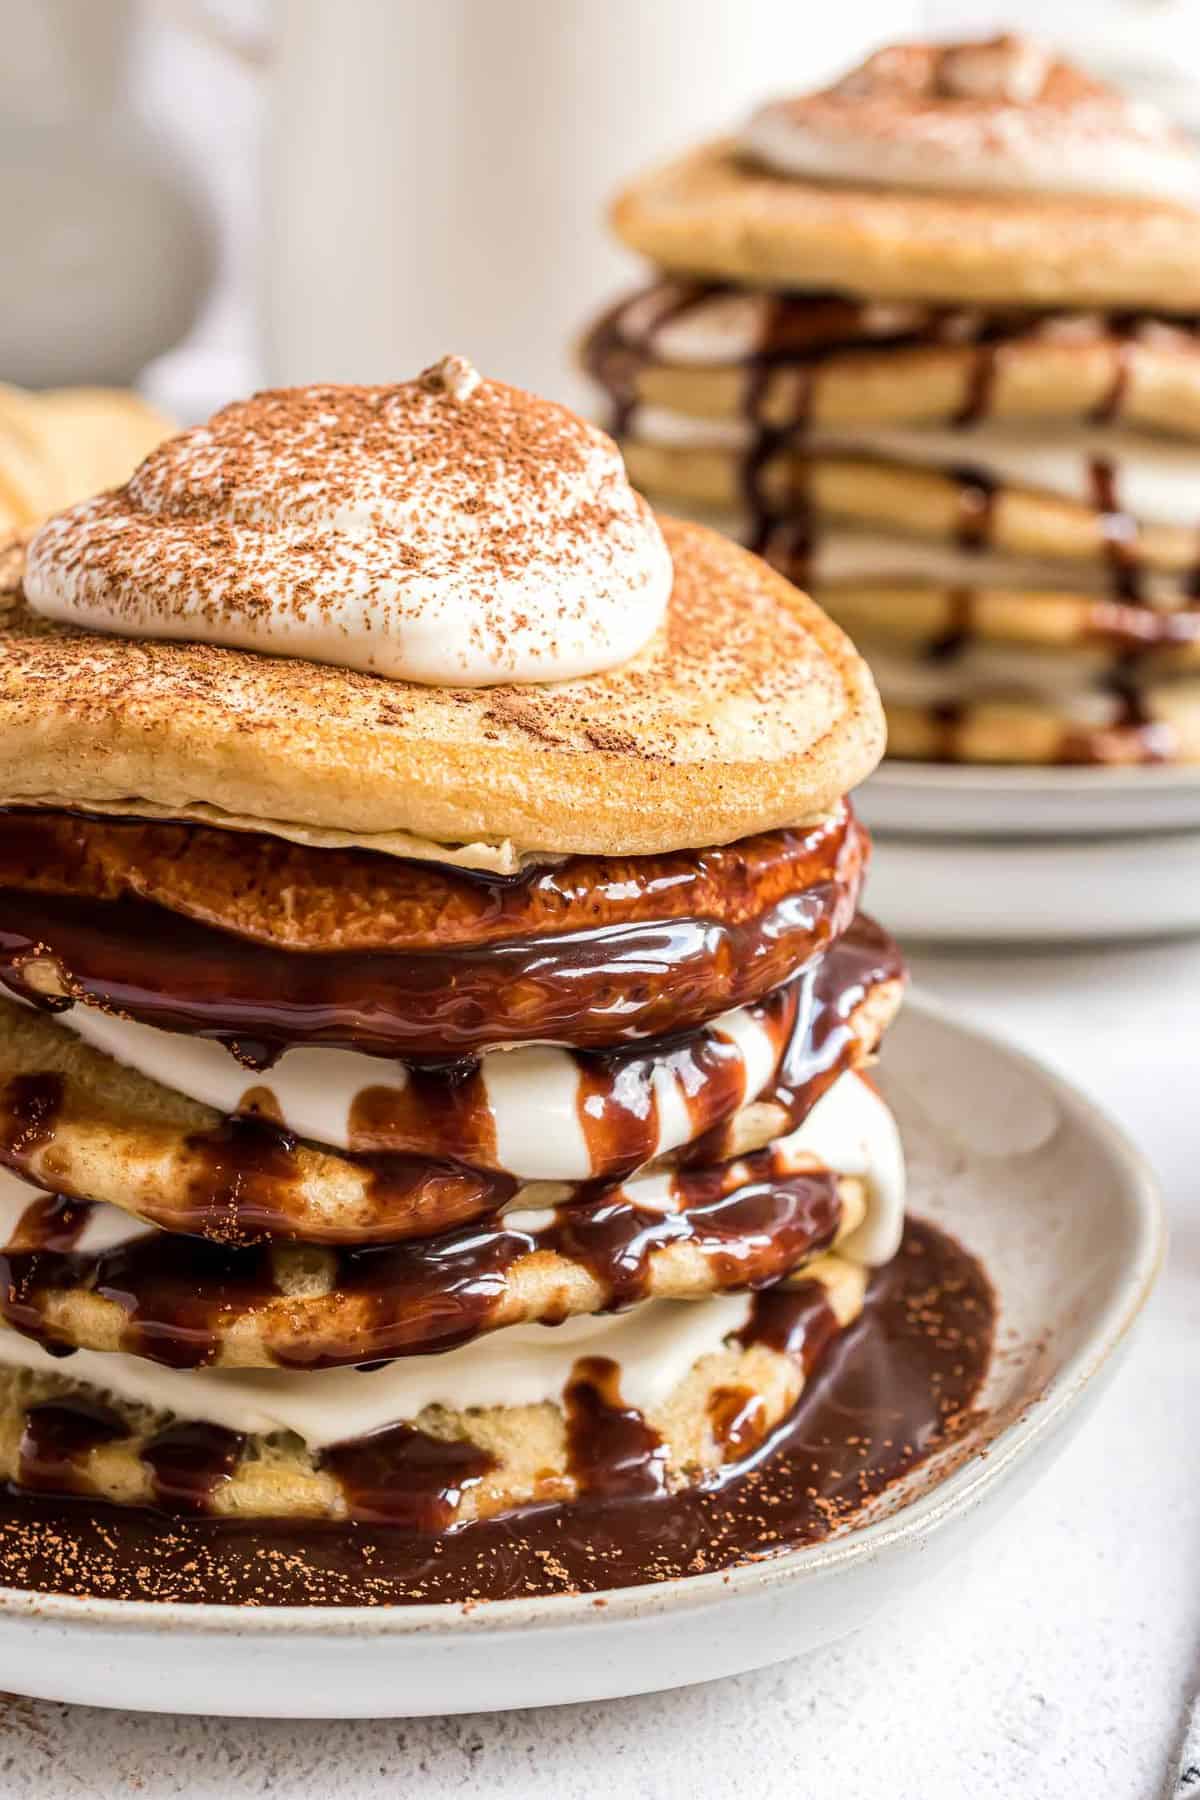 Pancakes layered with mascarpone filling and kahlua syrup.